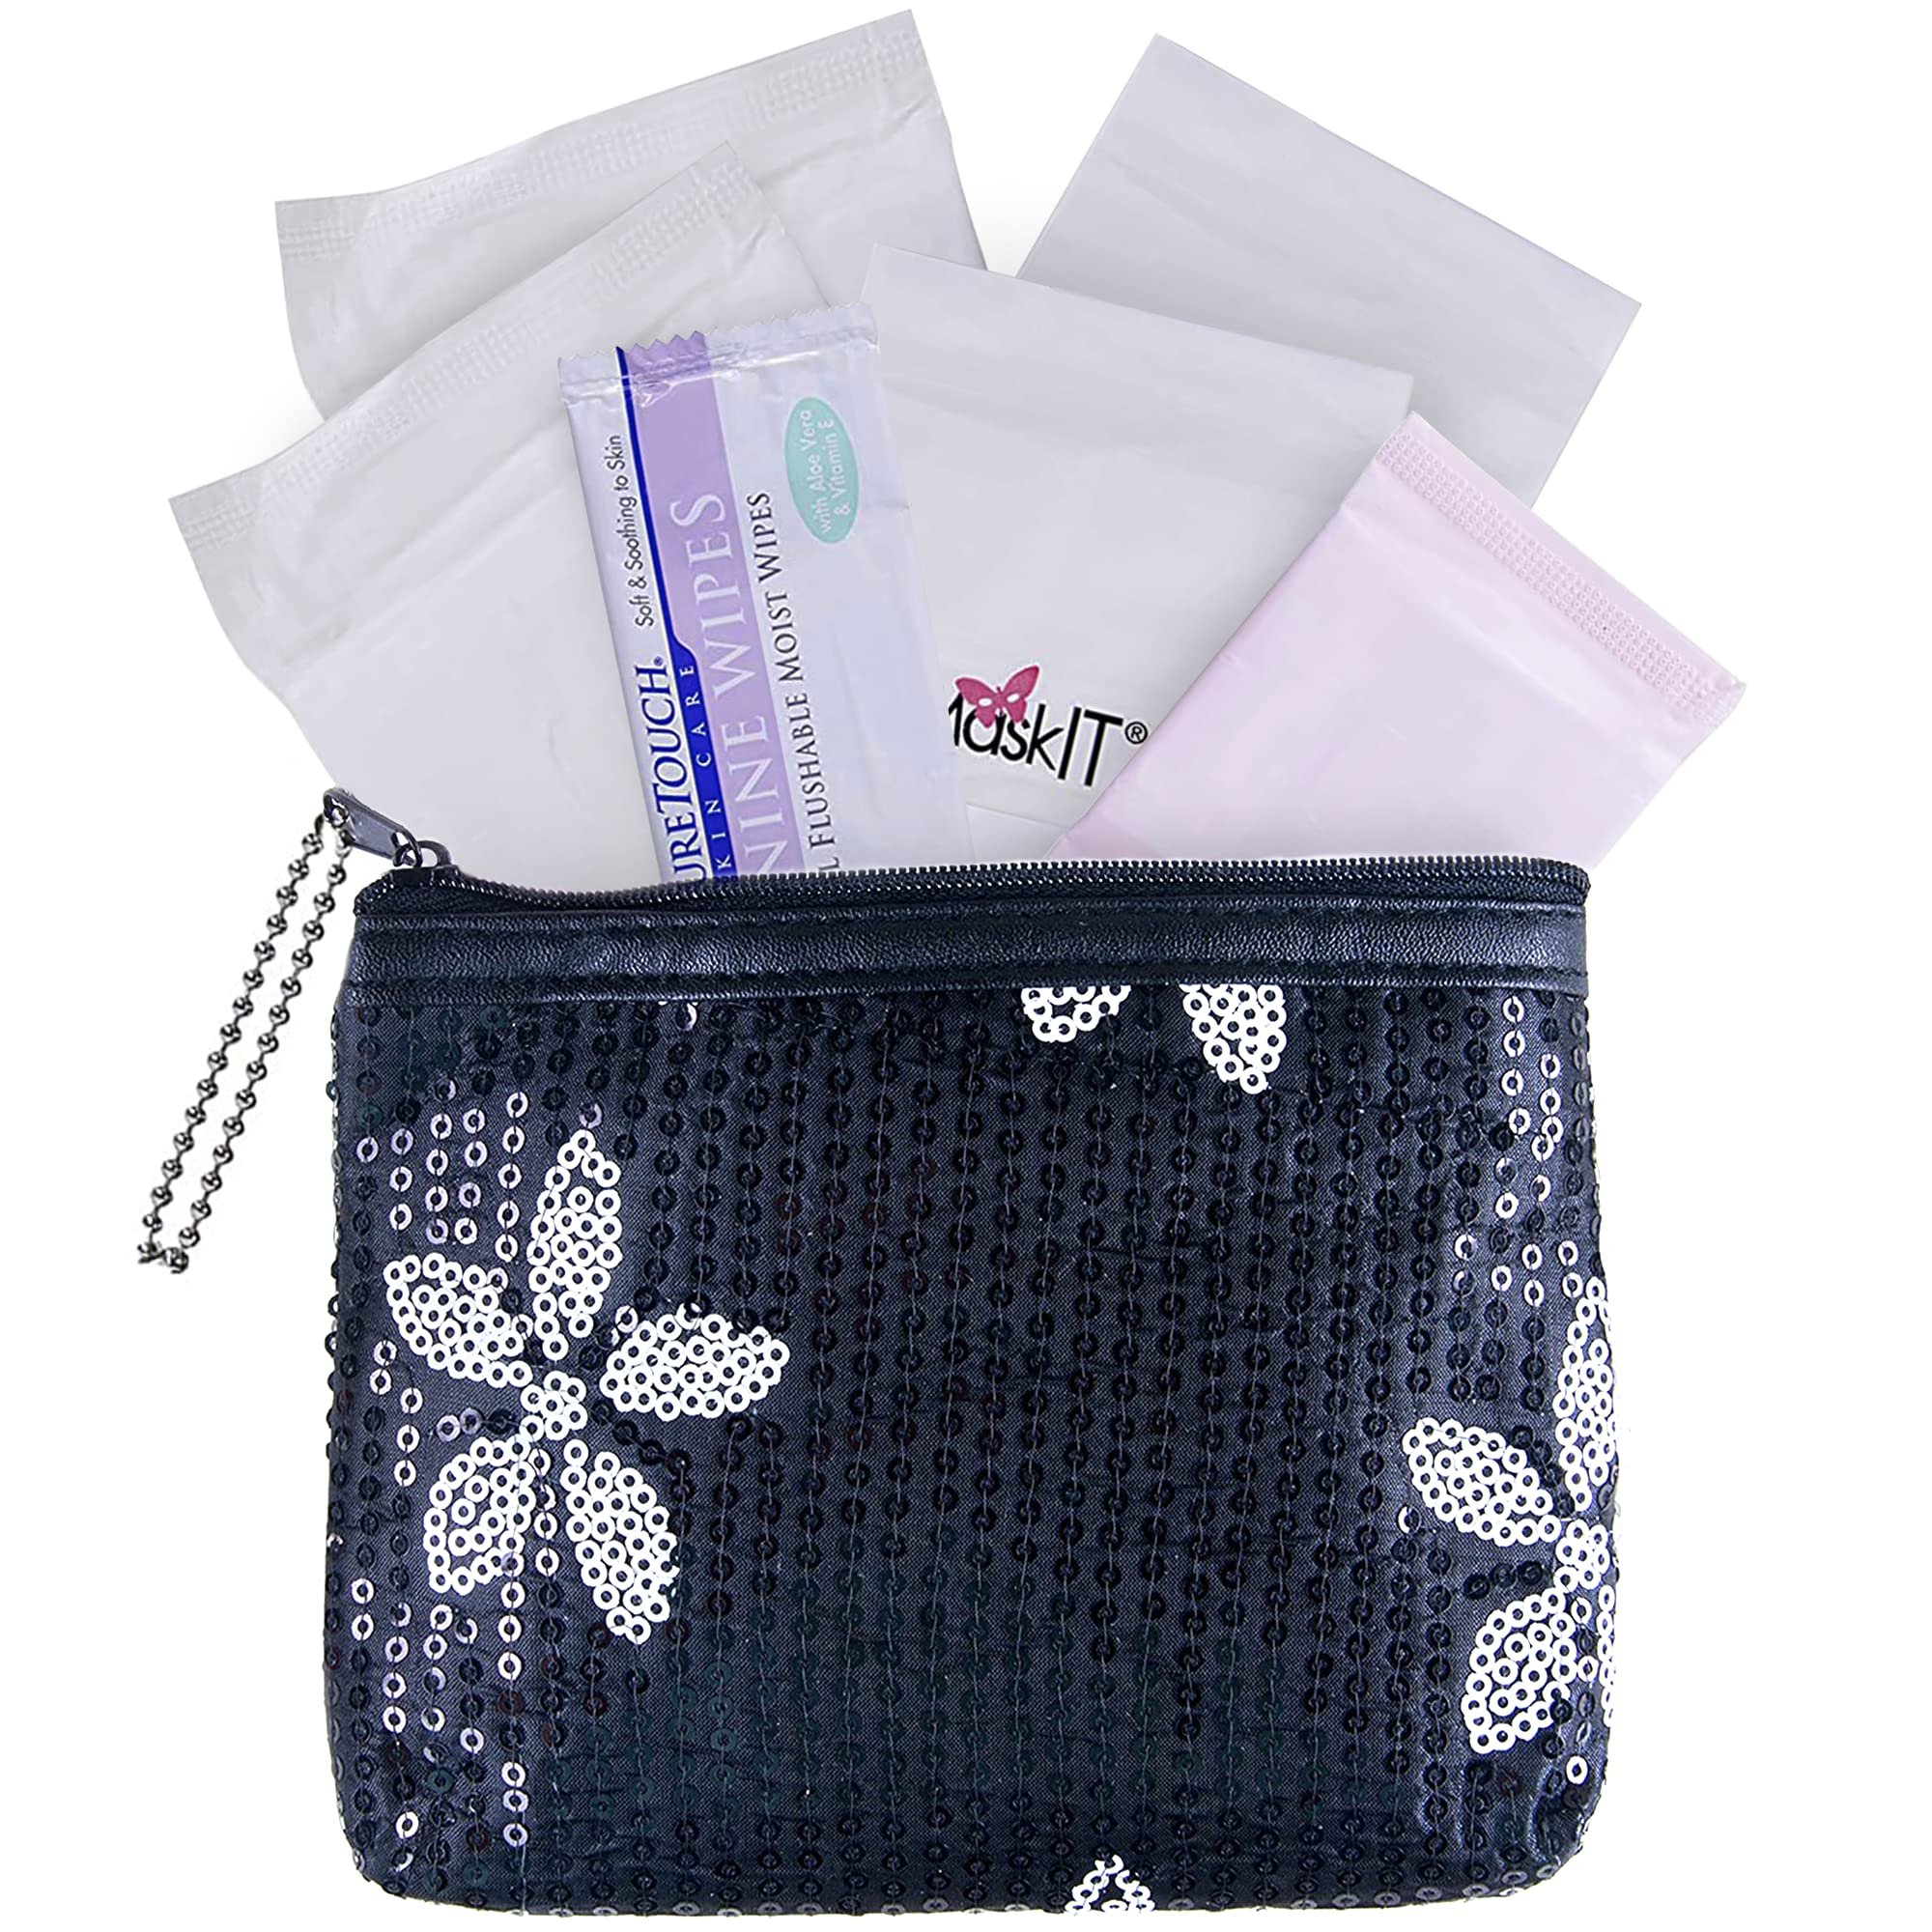 Book Cover Menstruation Kit - First Period Kit to-go! (Period Starter Kit with Organic & Biodegradable Pads) (Black)